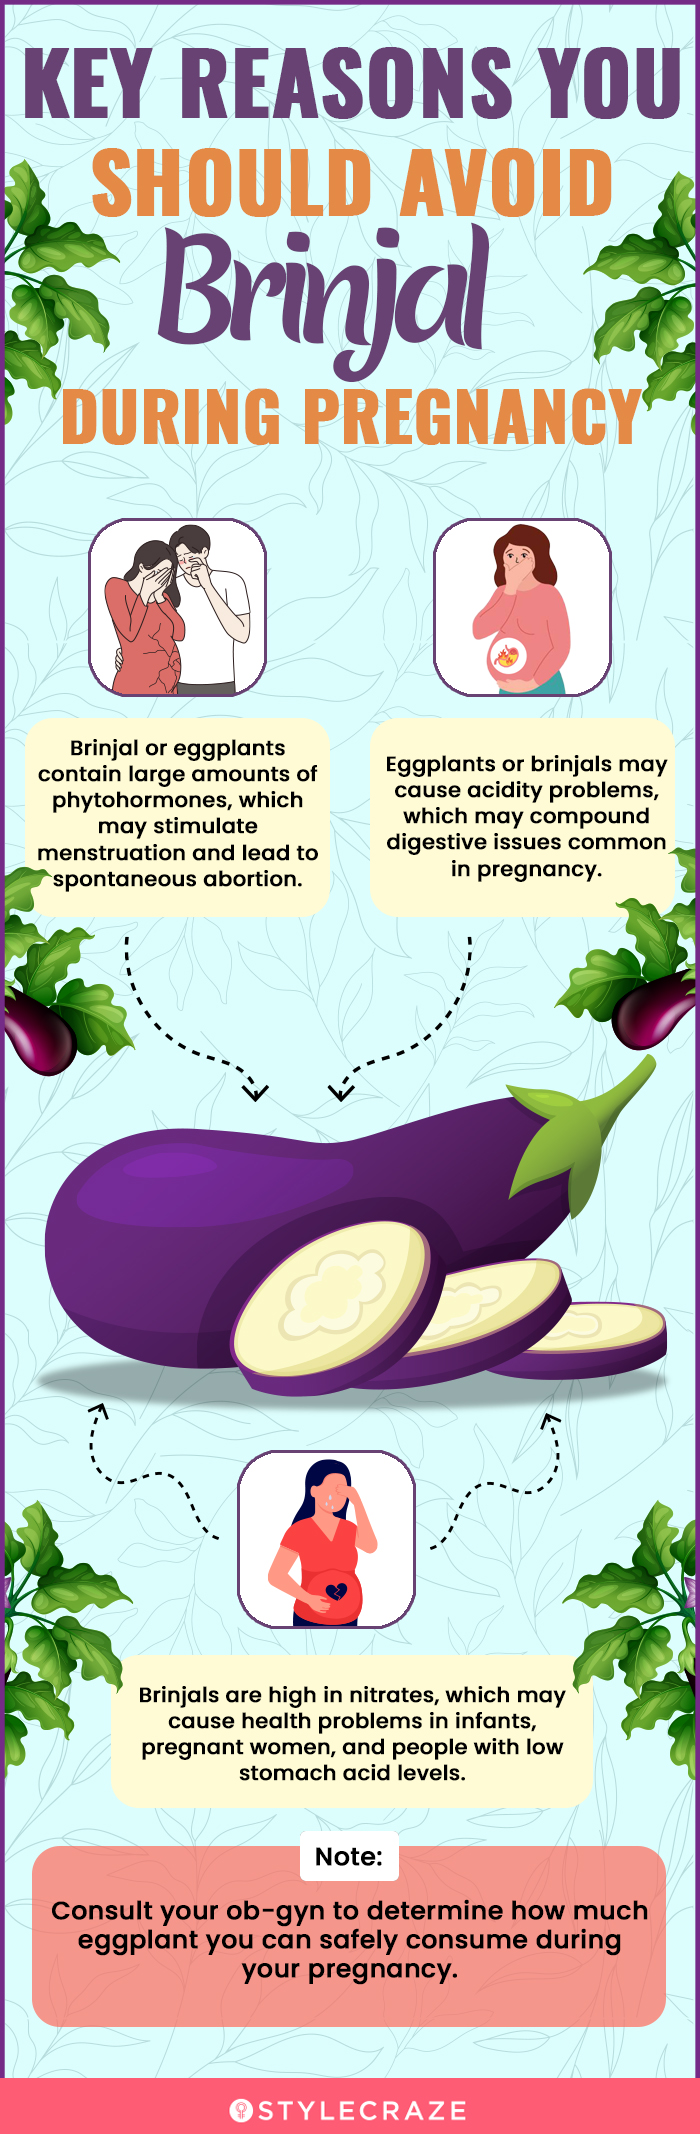 key reasons you should avoid brinjal during pregnancy [infographic]